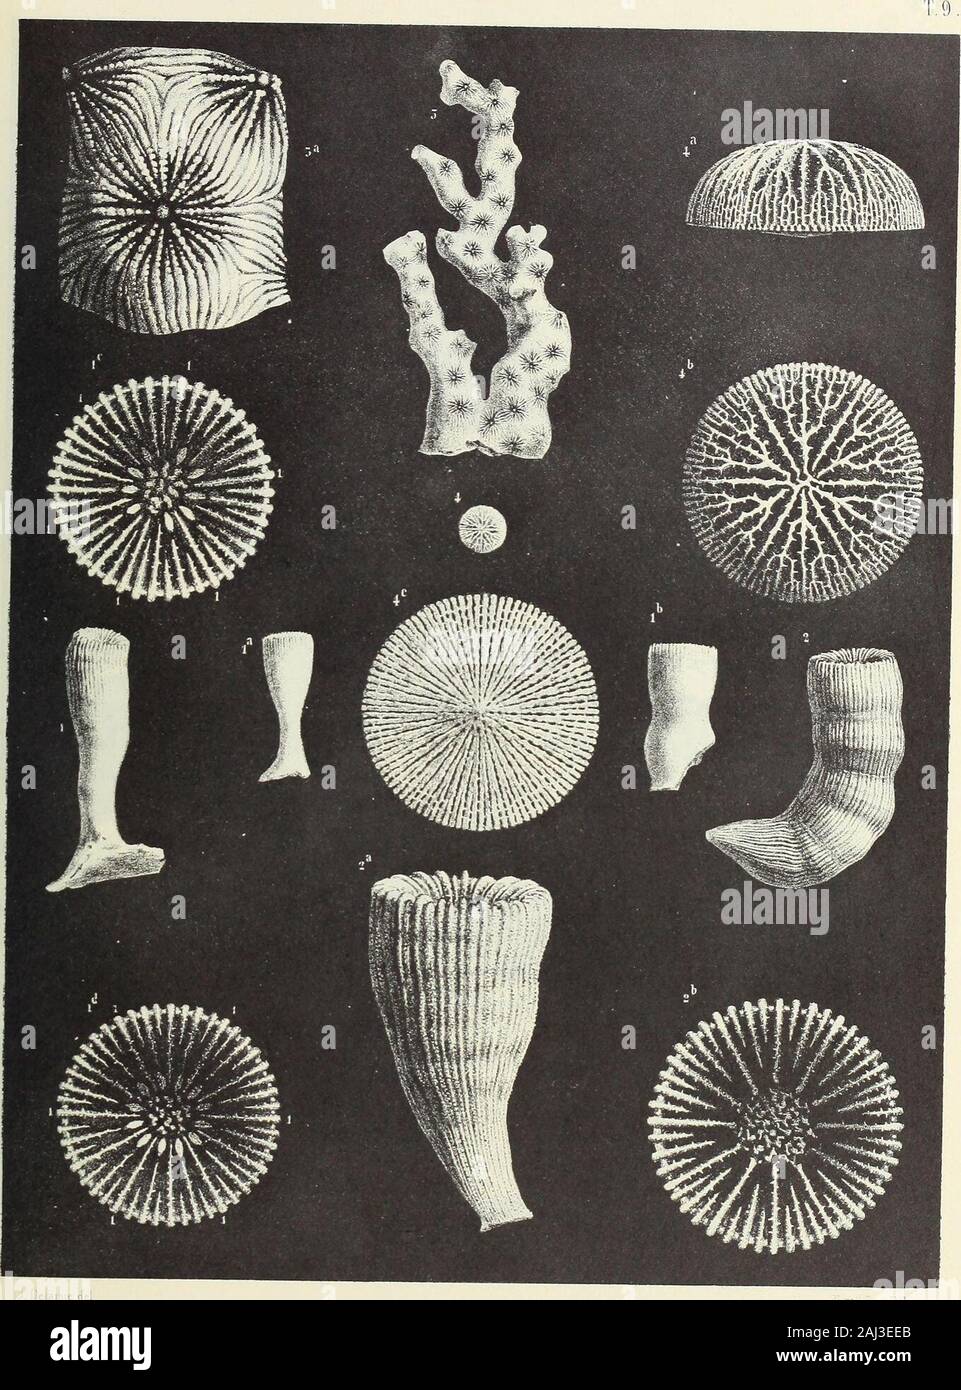 Monograph of the Palaeontographical Society . I TAB. IX.CORALS FROM THE UPPER CHALK. Cyathina. laevigata (p. 44). Fig, 1, la, lb, Specimens of different forms ; natural size. 1 c. Calico of the specimen fig. 1, magnified. It is to be remarked that in thisspecimen there are only nine pali; these organs not existing in the halfsystems, where the septa of the fourth cyclum are not developed. 1 d. Calice of the specimen fig. 1 b, magnified, and showing the twelve pali and the complete fourth cyclum of septa. Parasmilia Fittoni (p. 50). Fig. 2. Side view of the corallum ; natural size. 2 a Specimen Stock Photo